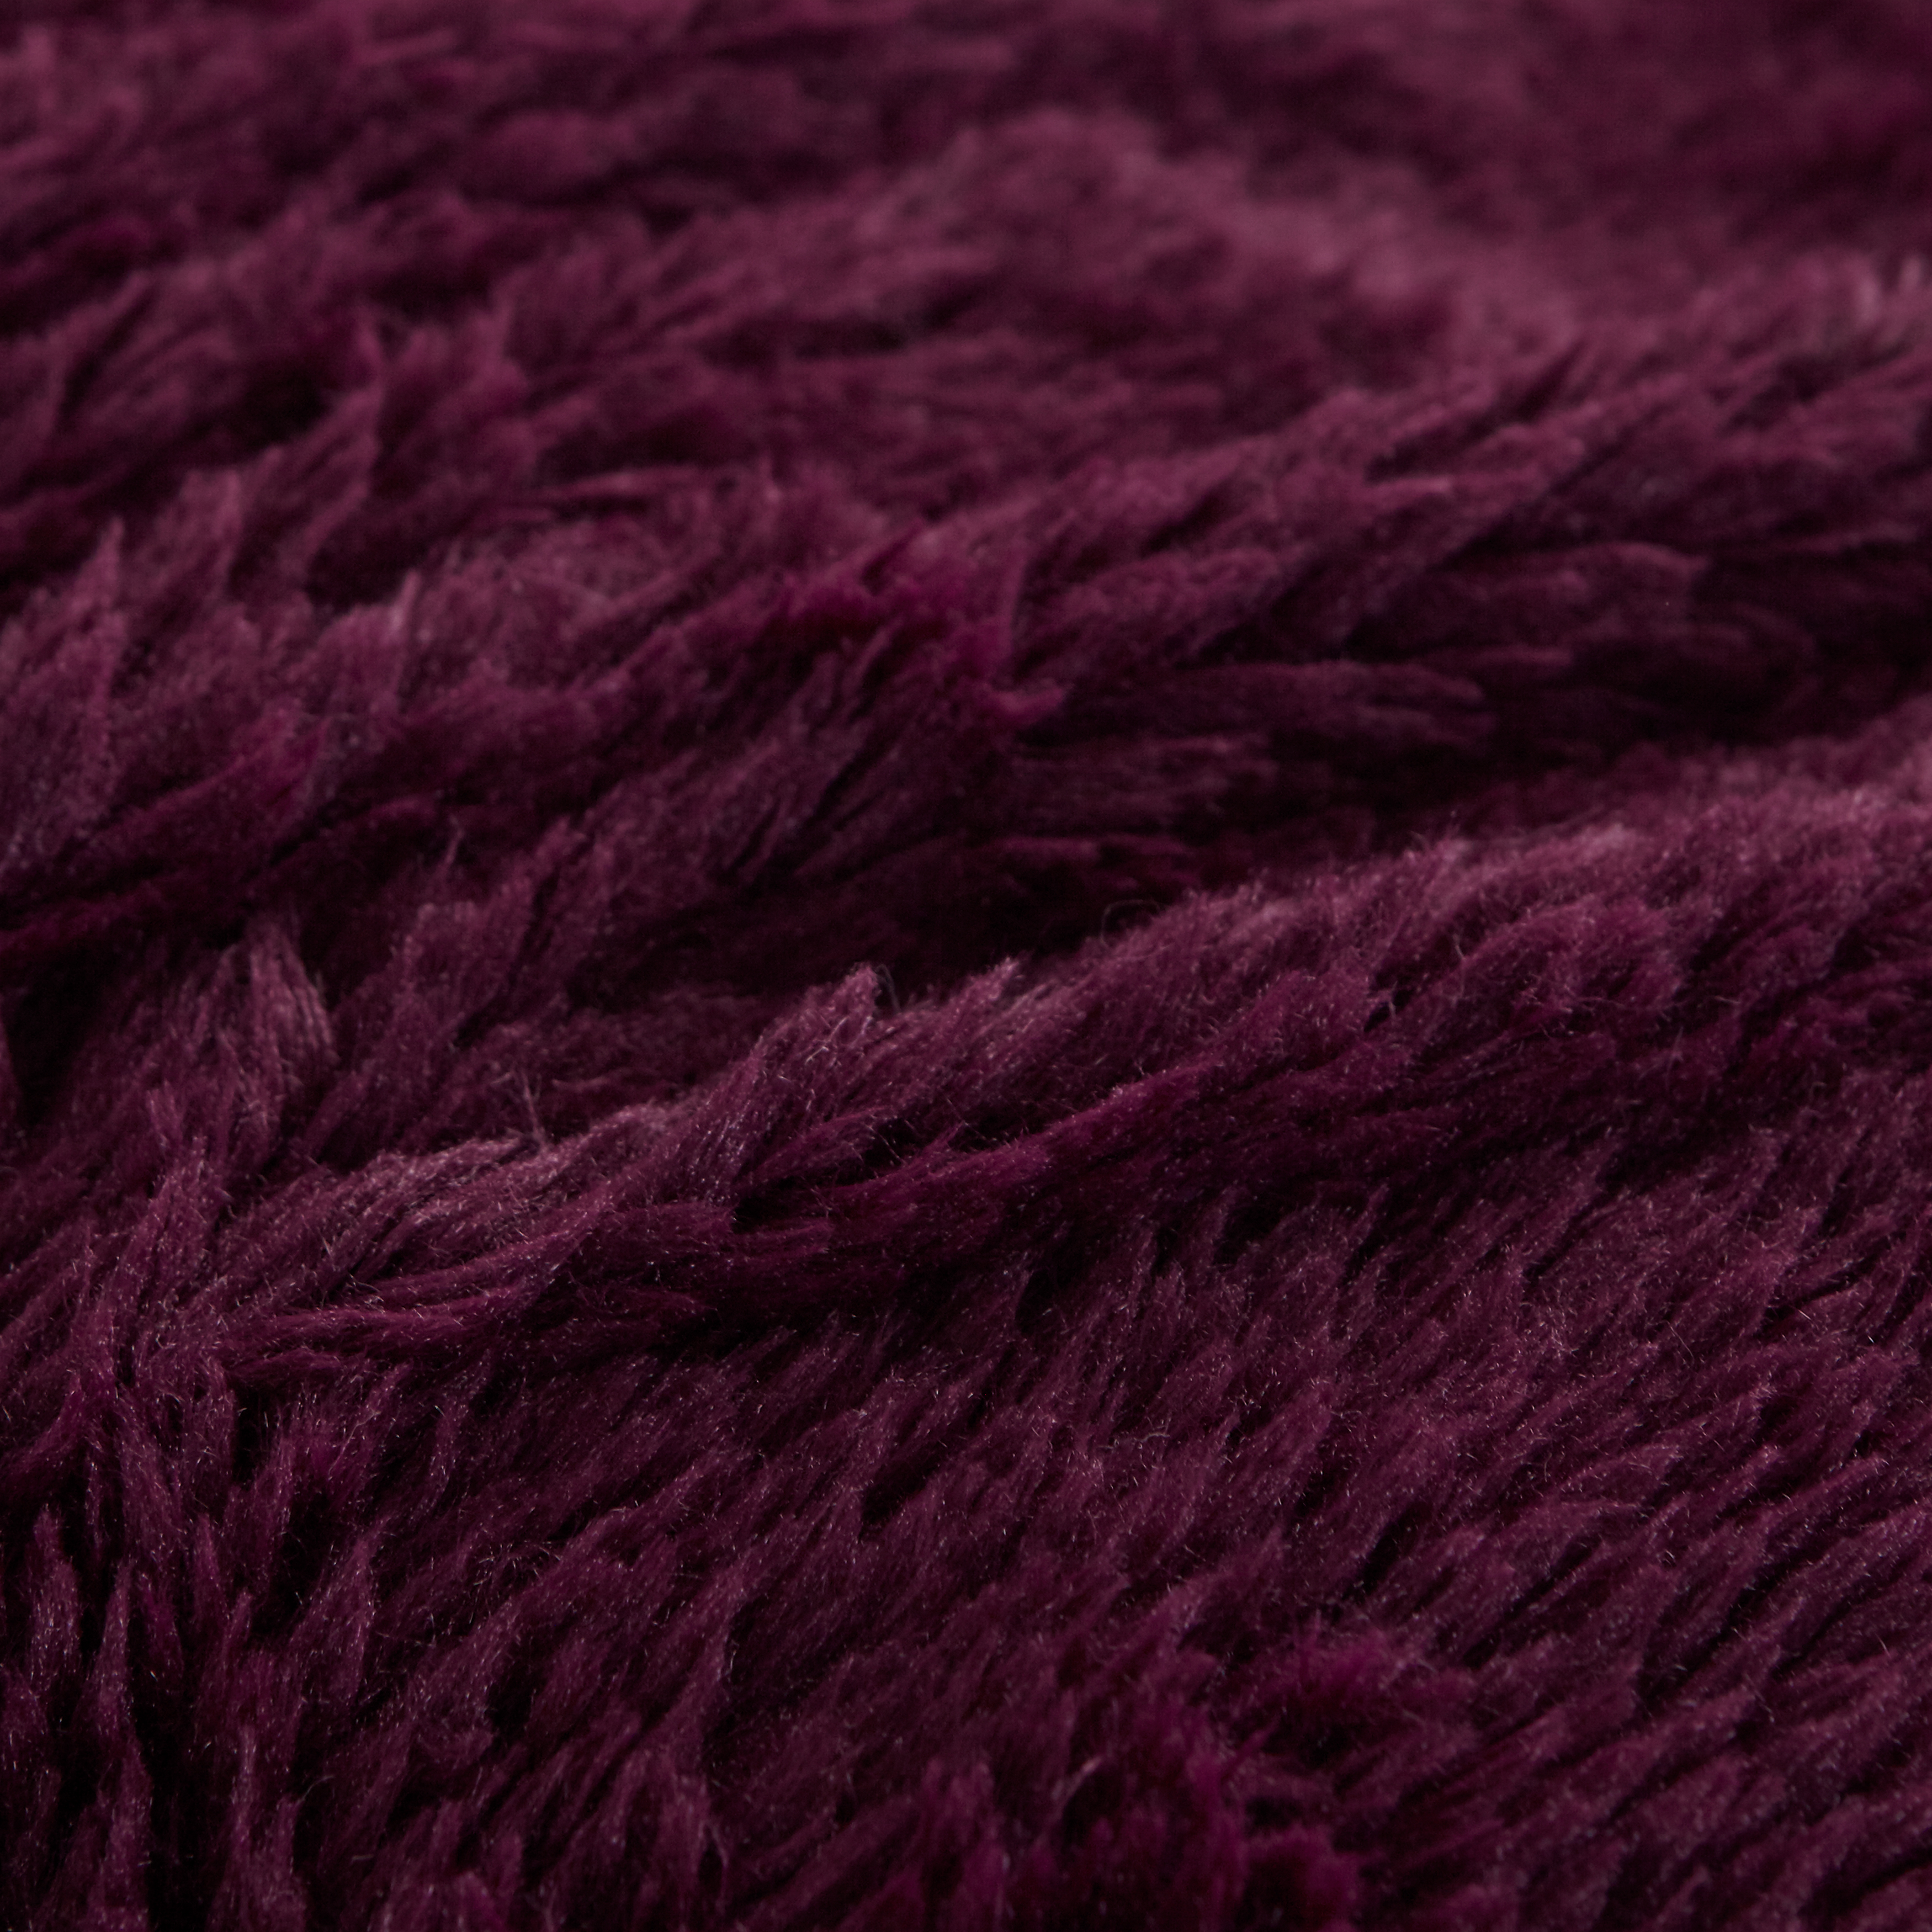 Puts This To Sleep - Coma Inducer® Twin XL Blanket - Burgundy